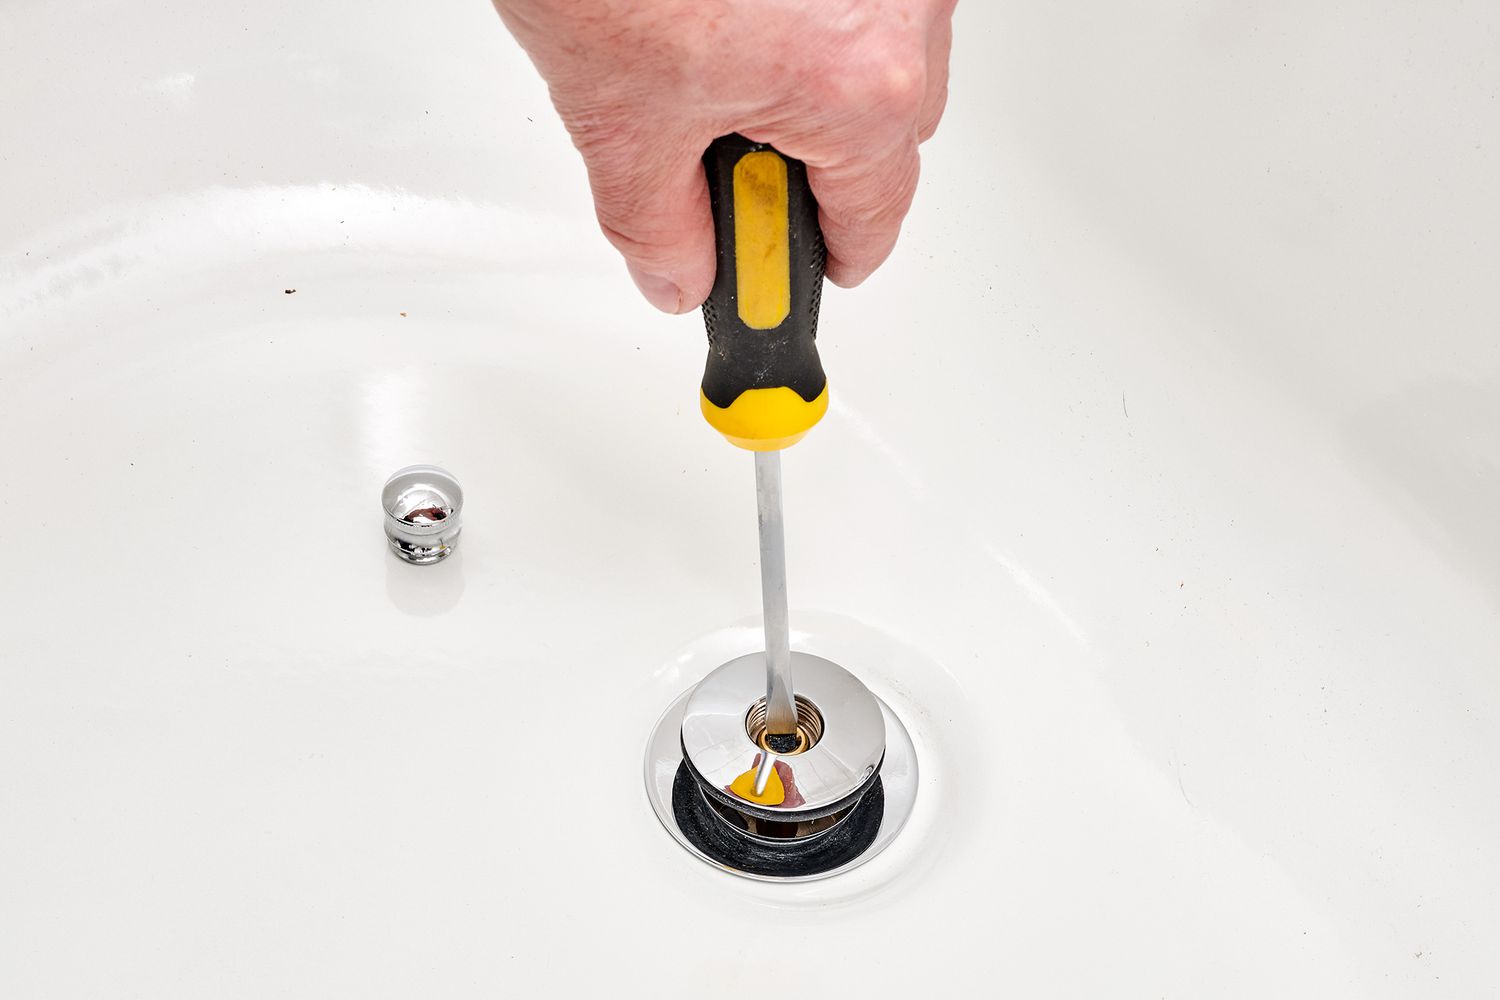 Screwdriver removing lift-and-turn drain stopper bolt from drain hole